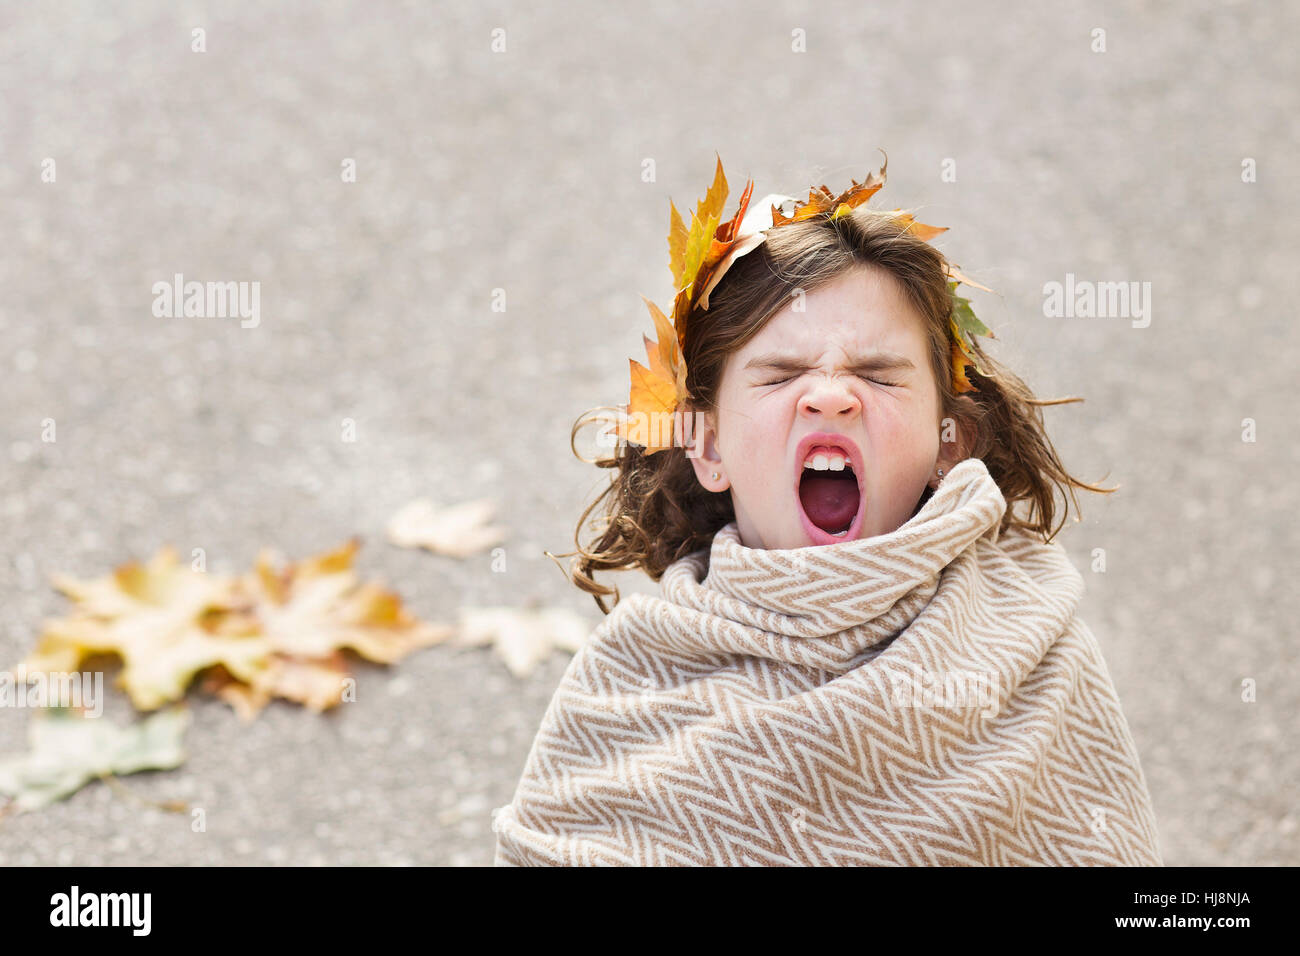 Girl wrapped in a blanket with a wreath of leaves in her hair yawning Stock Photo